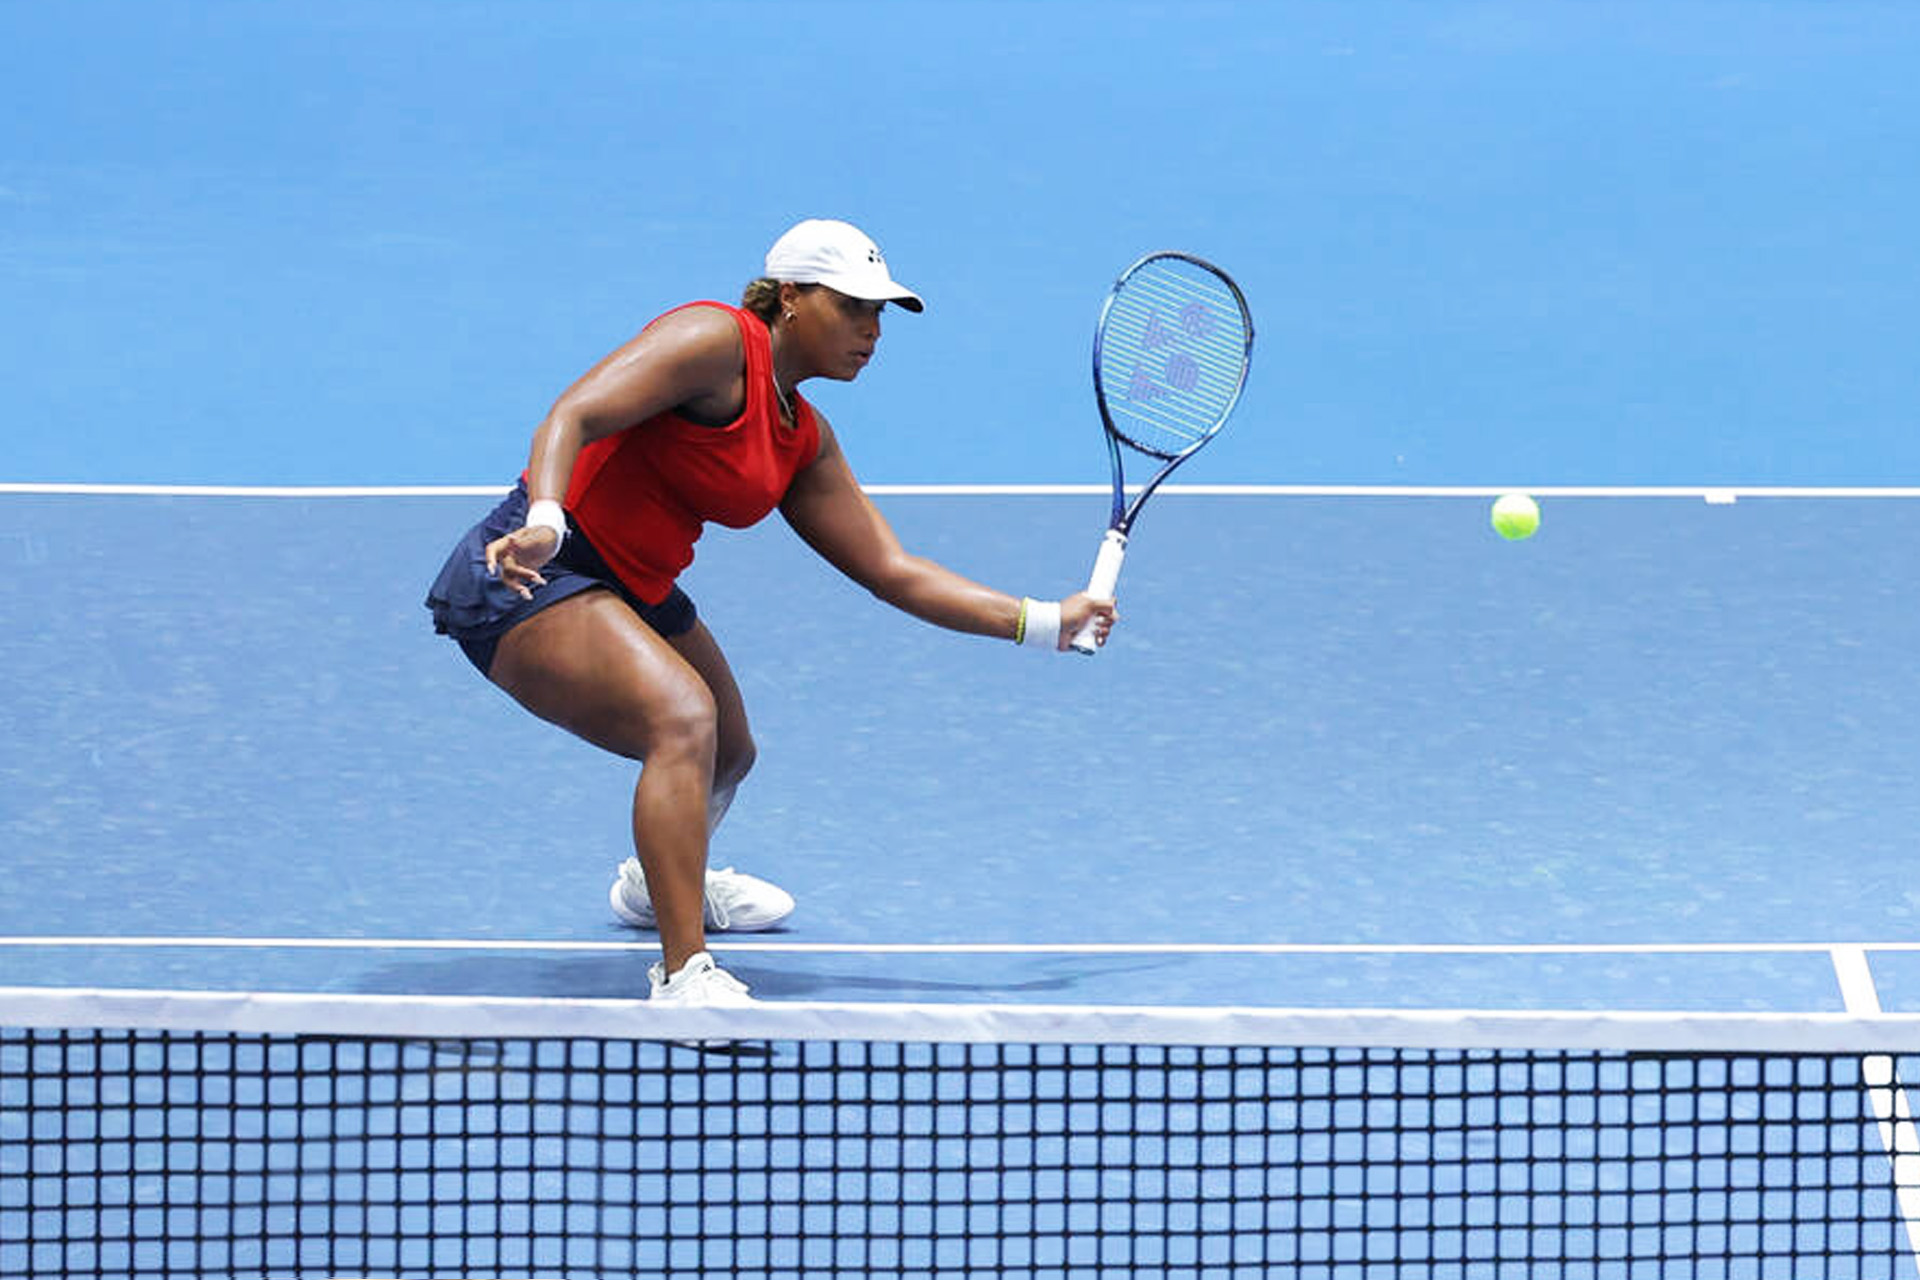 Female tennis player preparing for a backhand return on a blue court.